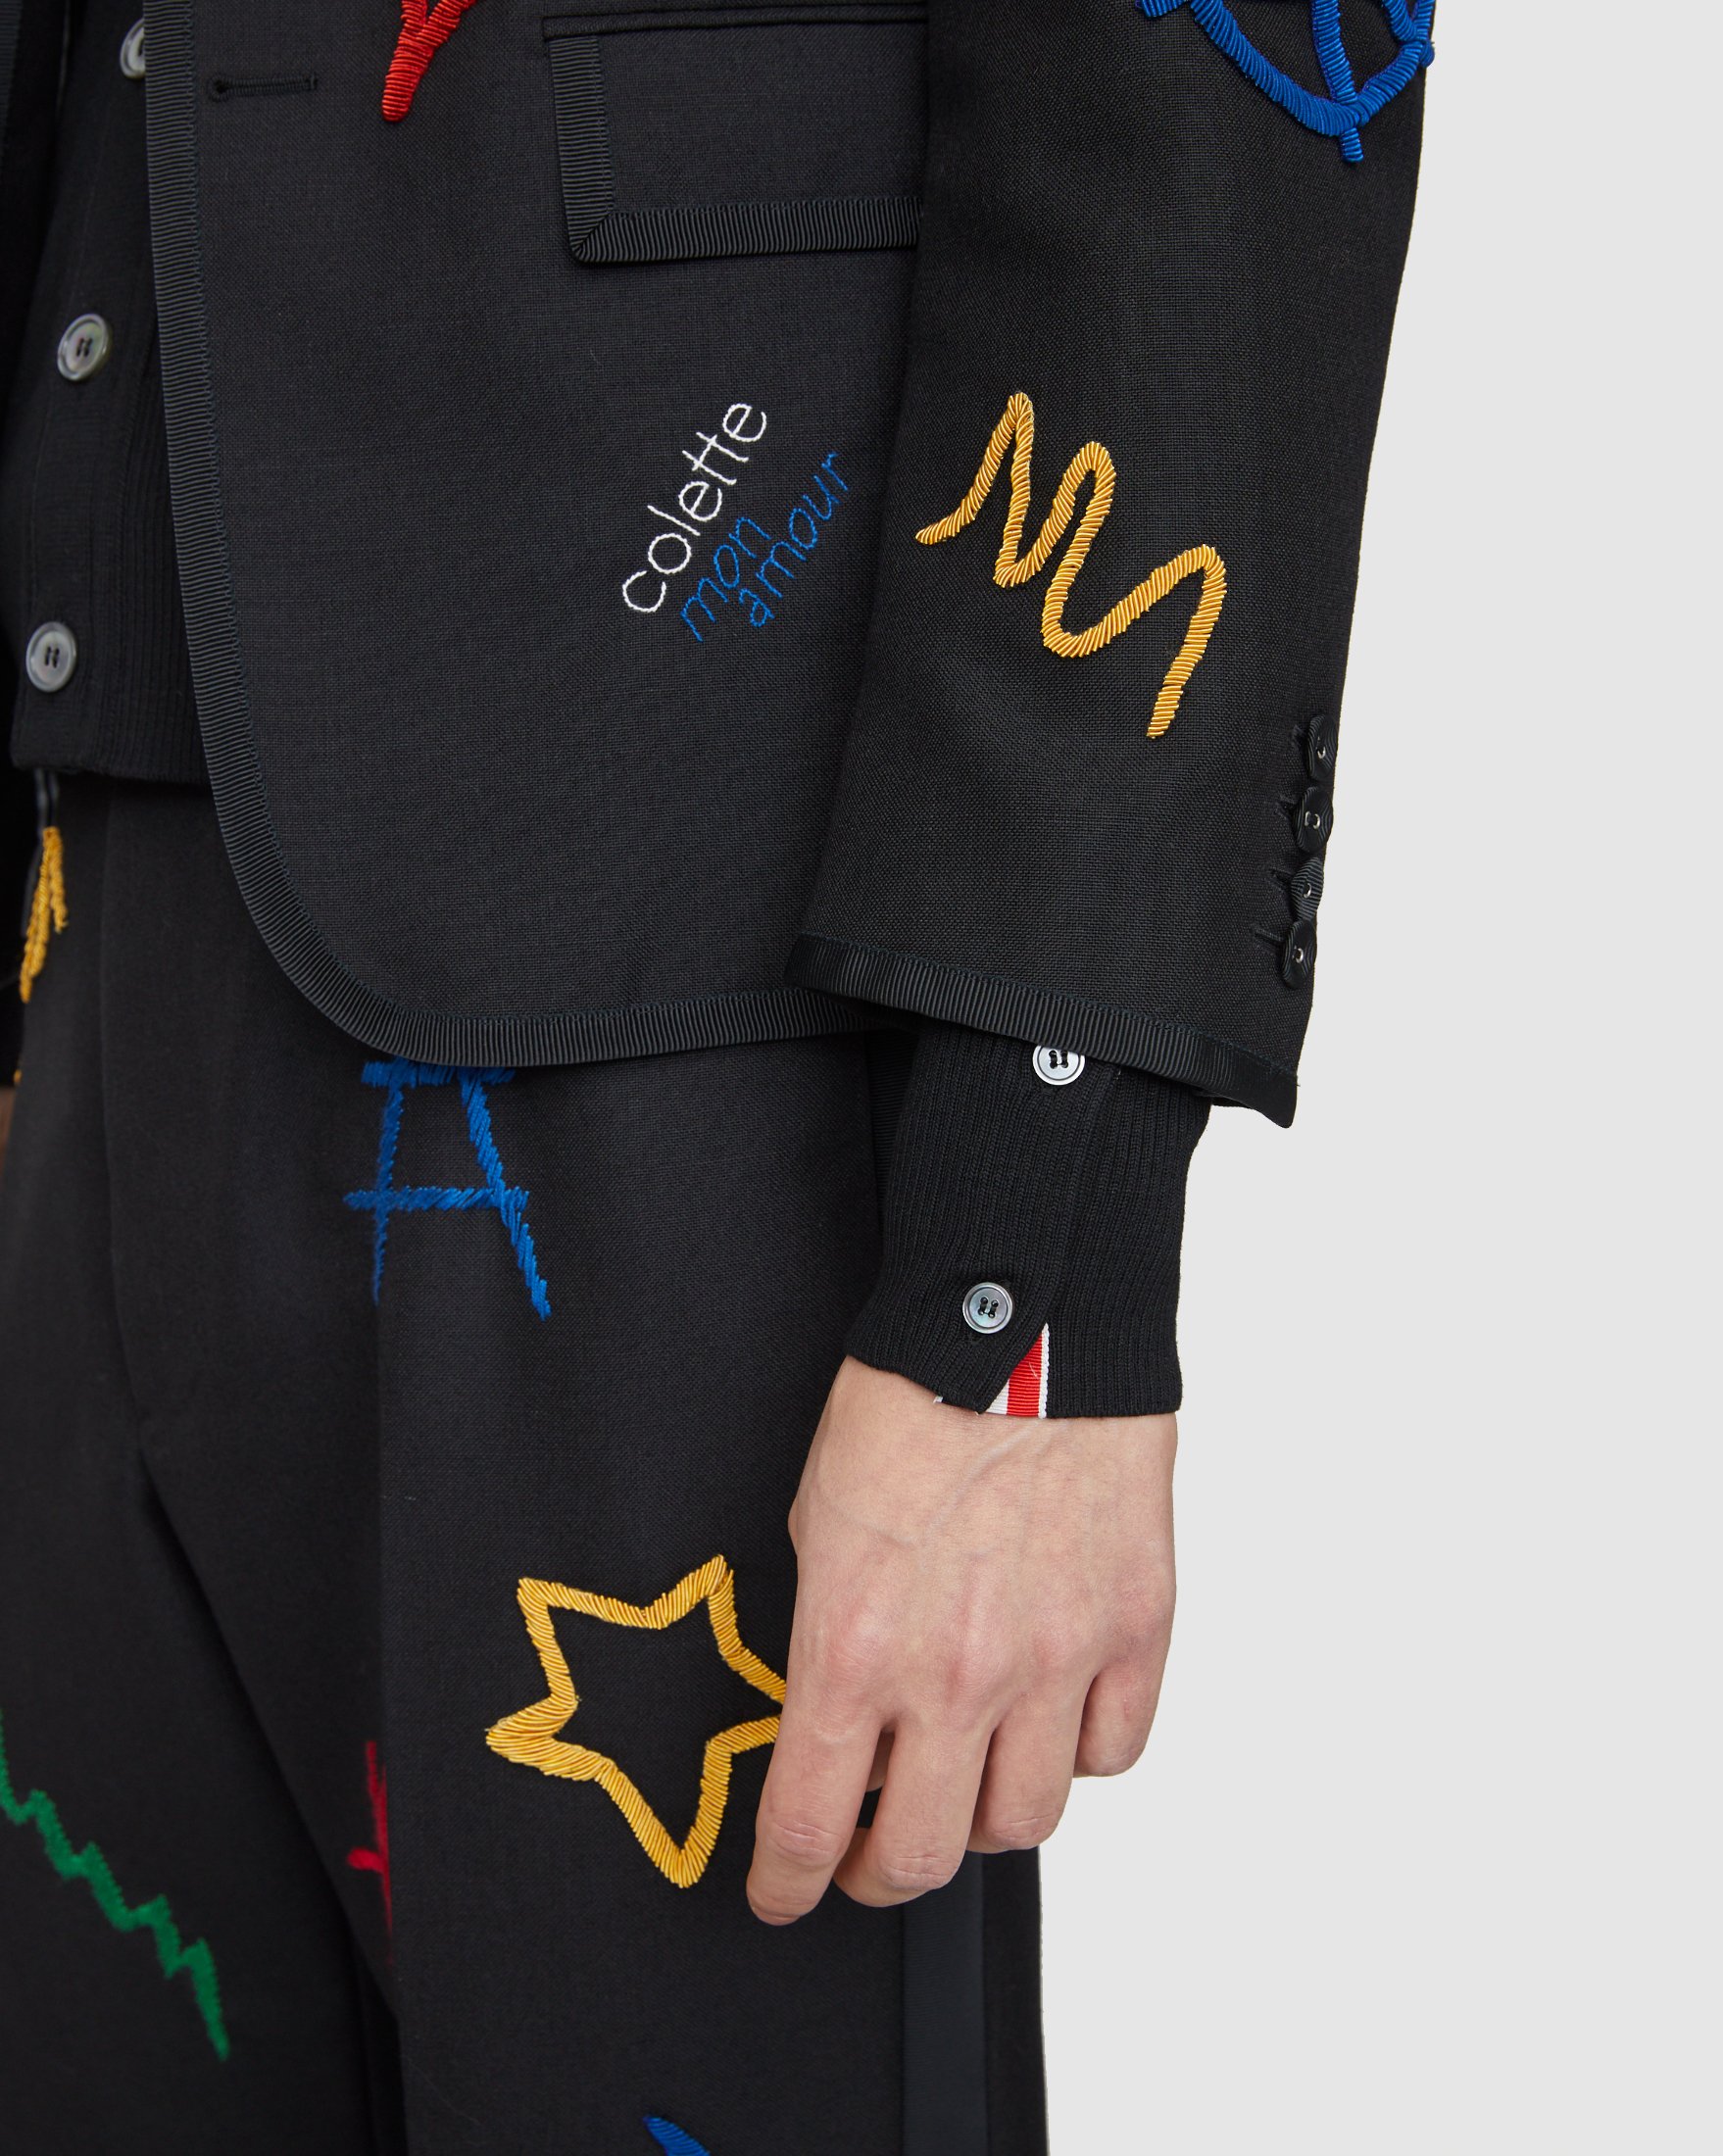 Colette Mon Amour x Thom Browne - Black Embroidered Tux Suit - Clothing - Grey - Image 11